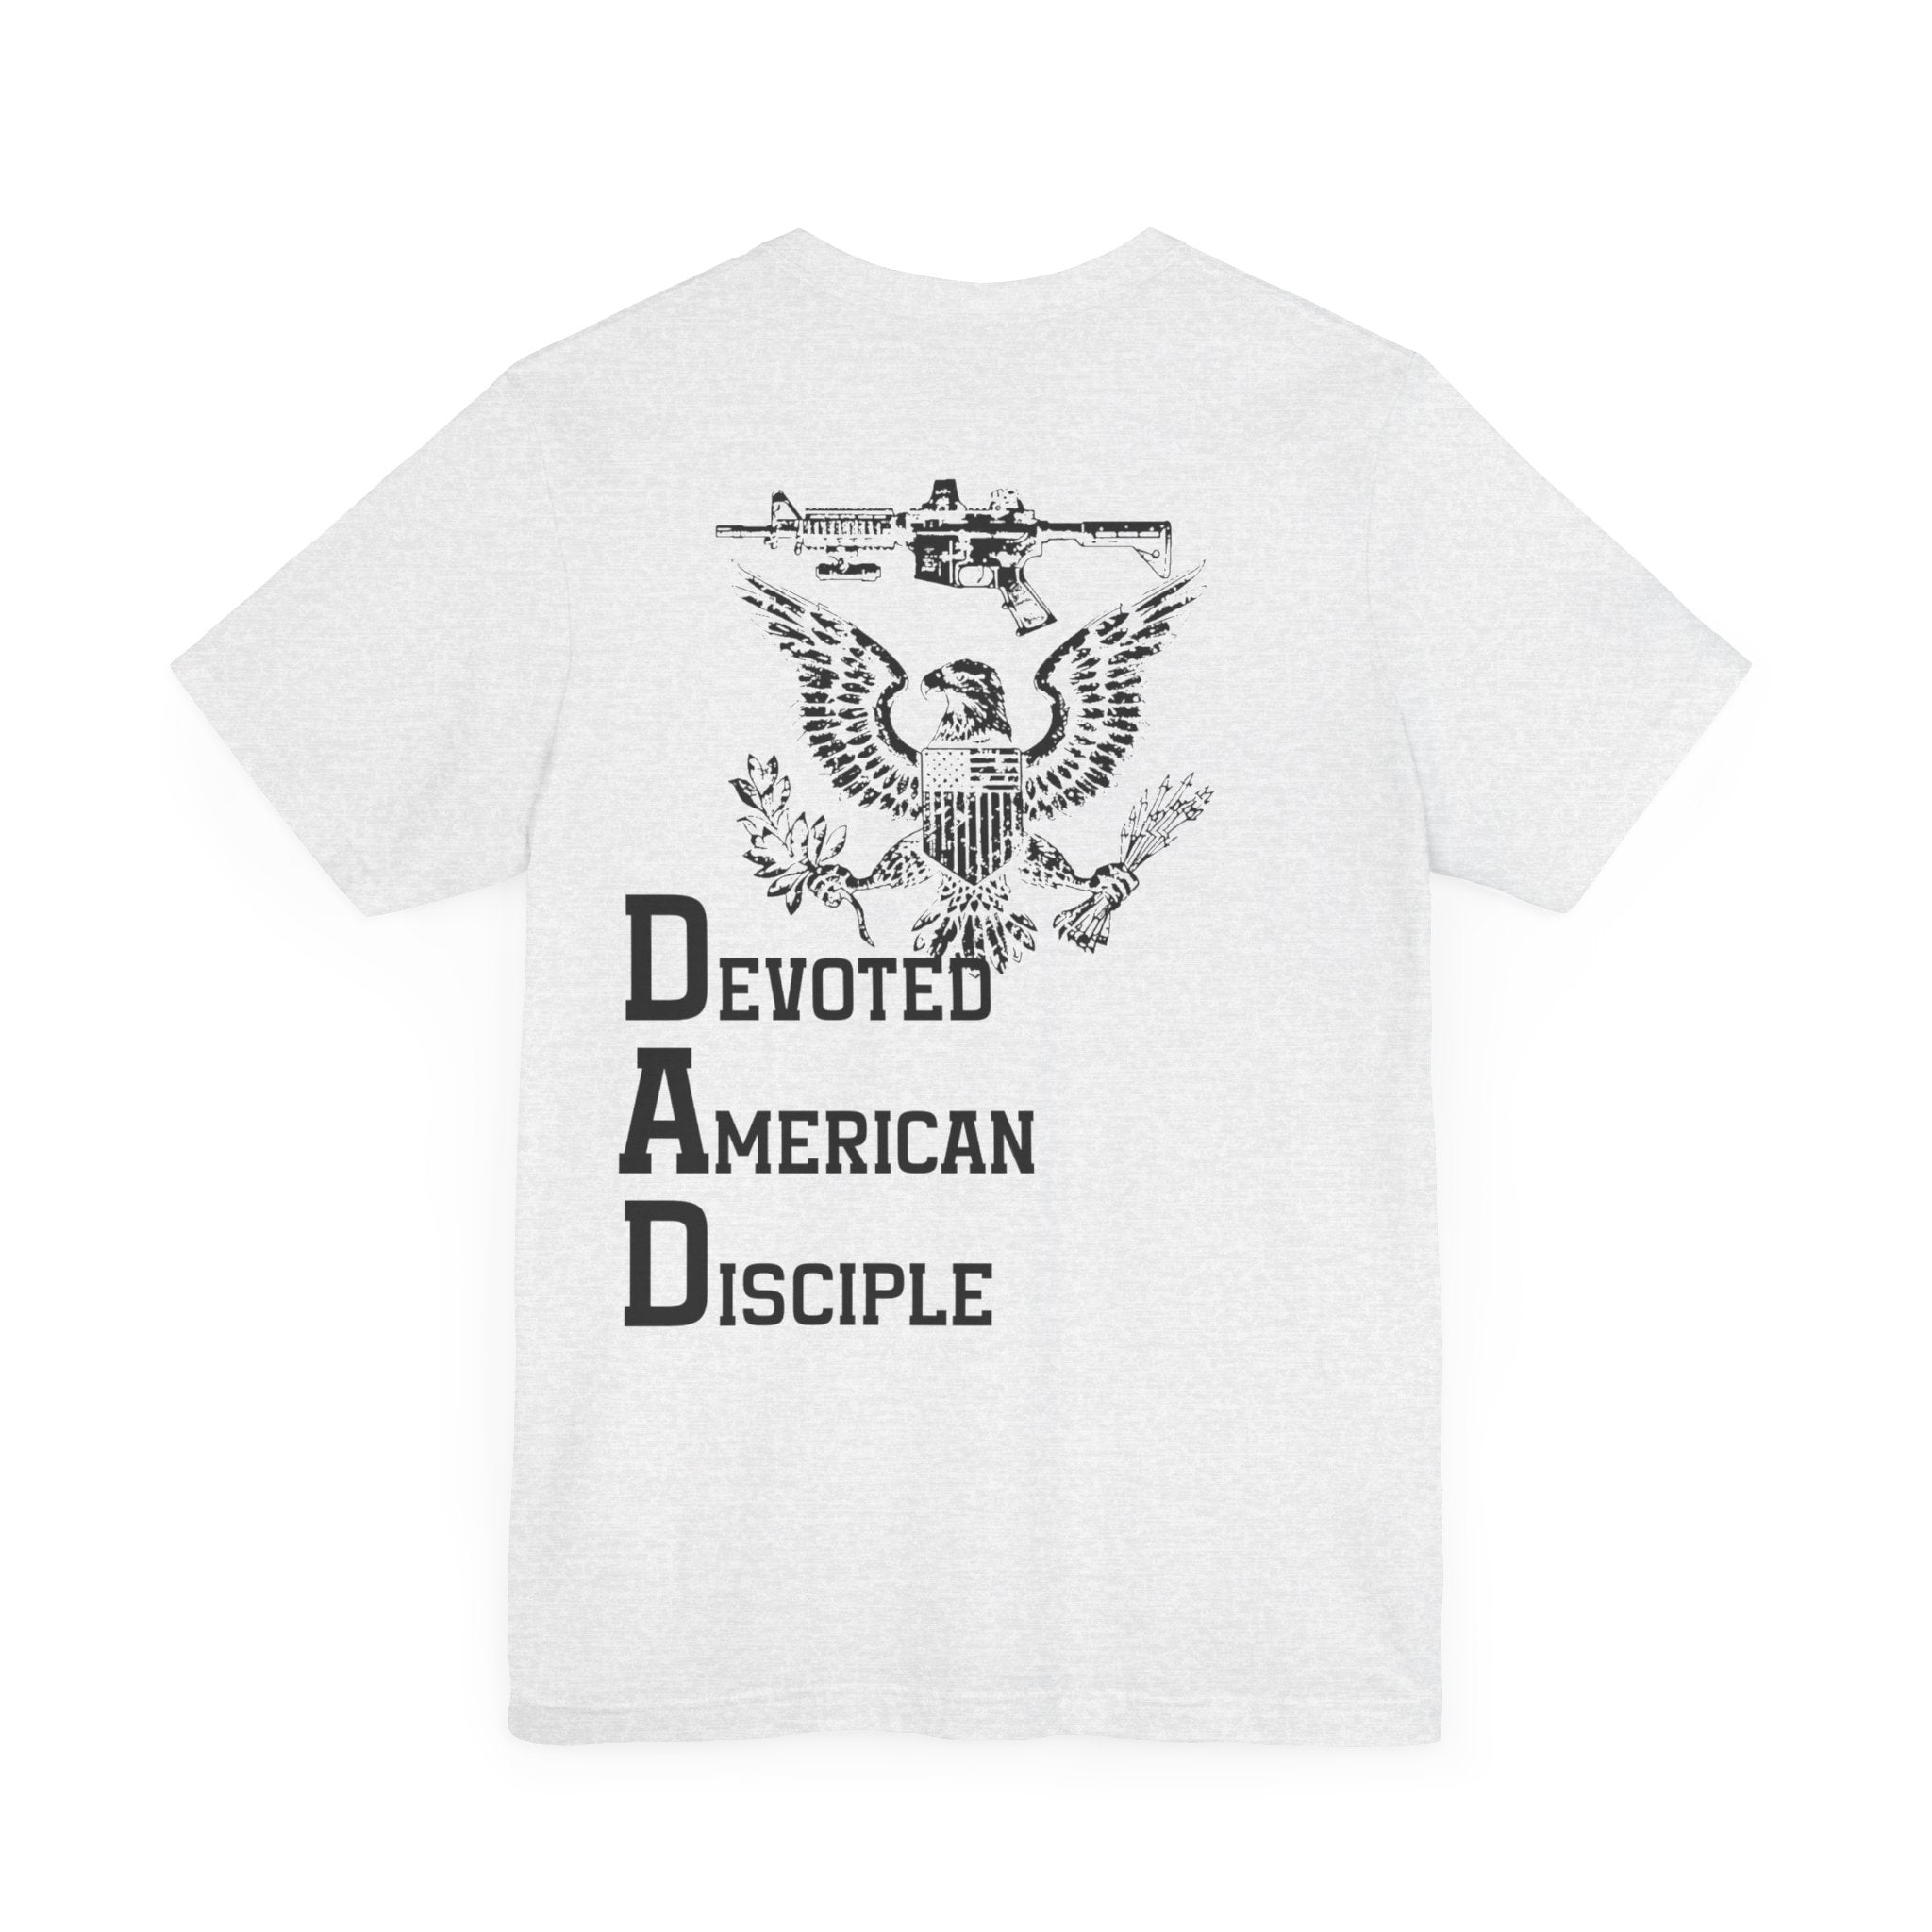 Devoted American Disciple T-Shirt (Back Design), Patriotic Eagle & Rifle Graphic Tee, Bold USA Supporter Shirt, American Pride Military Apparel